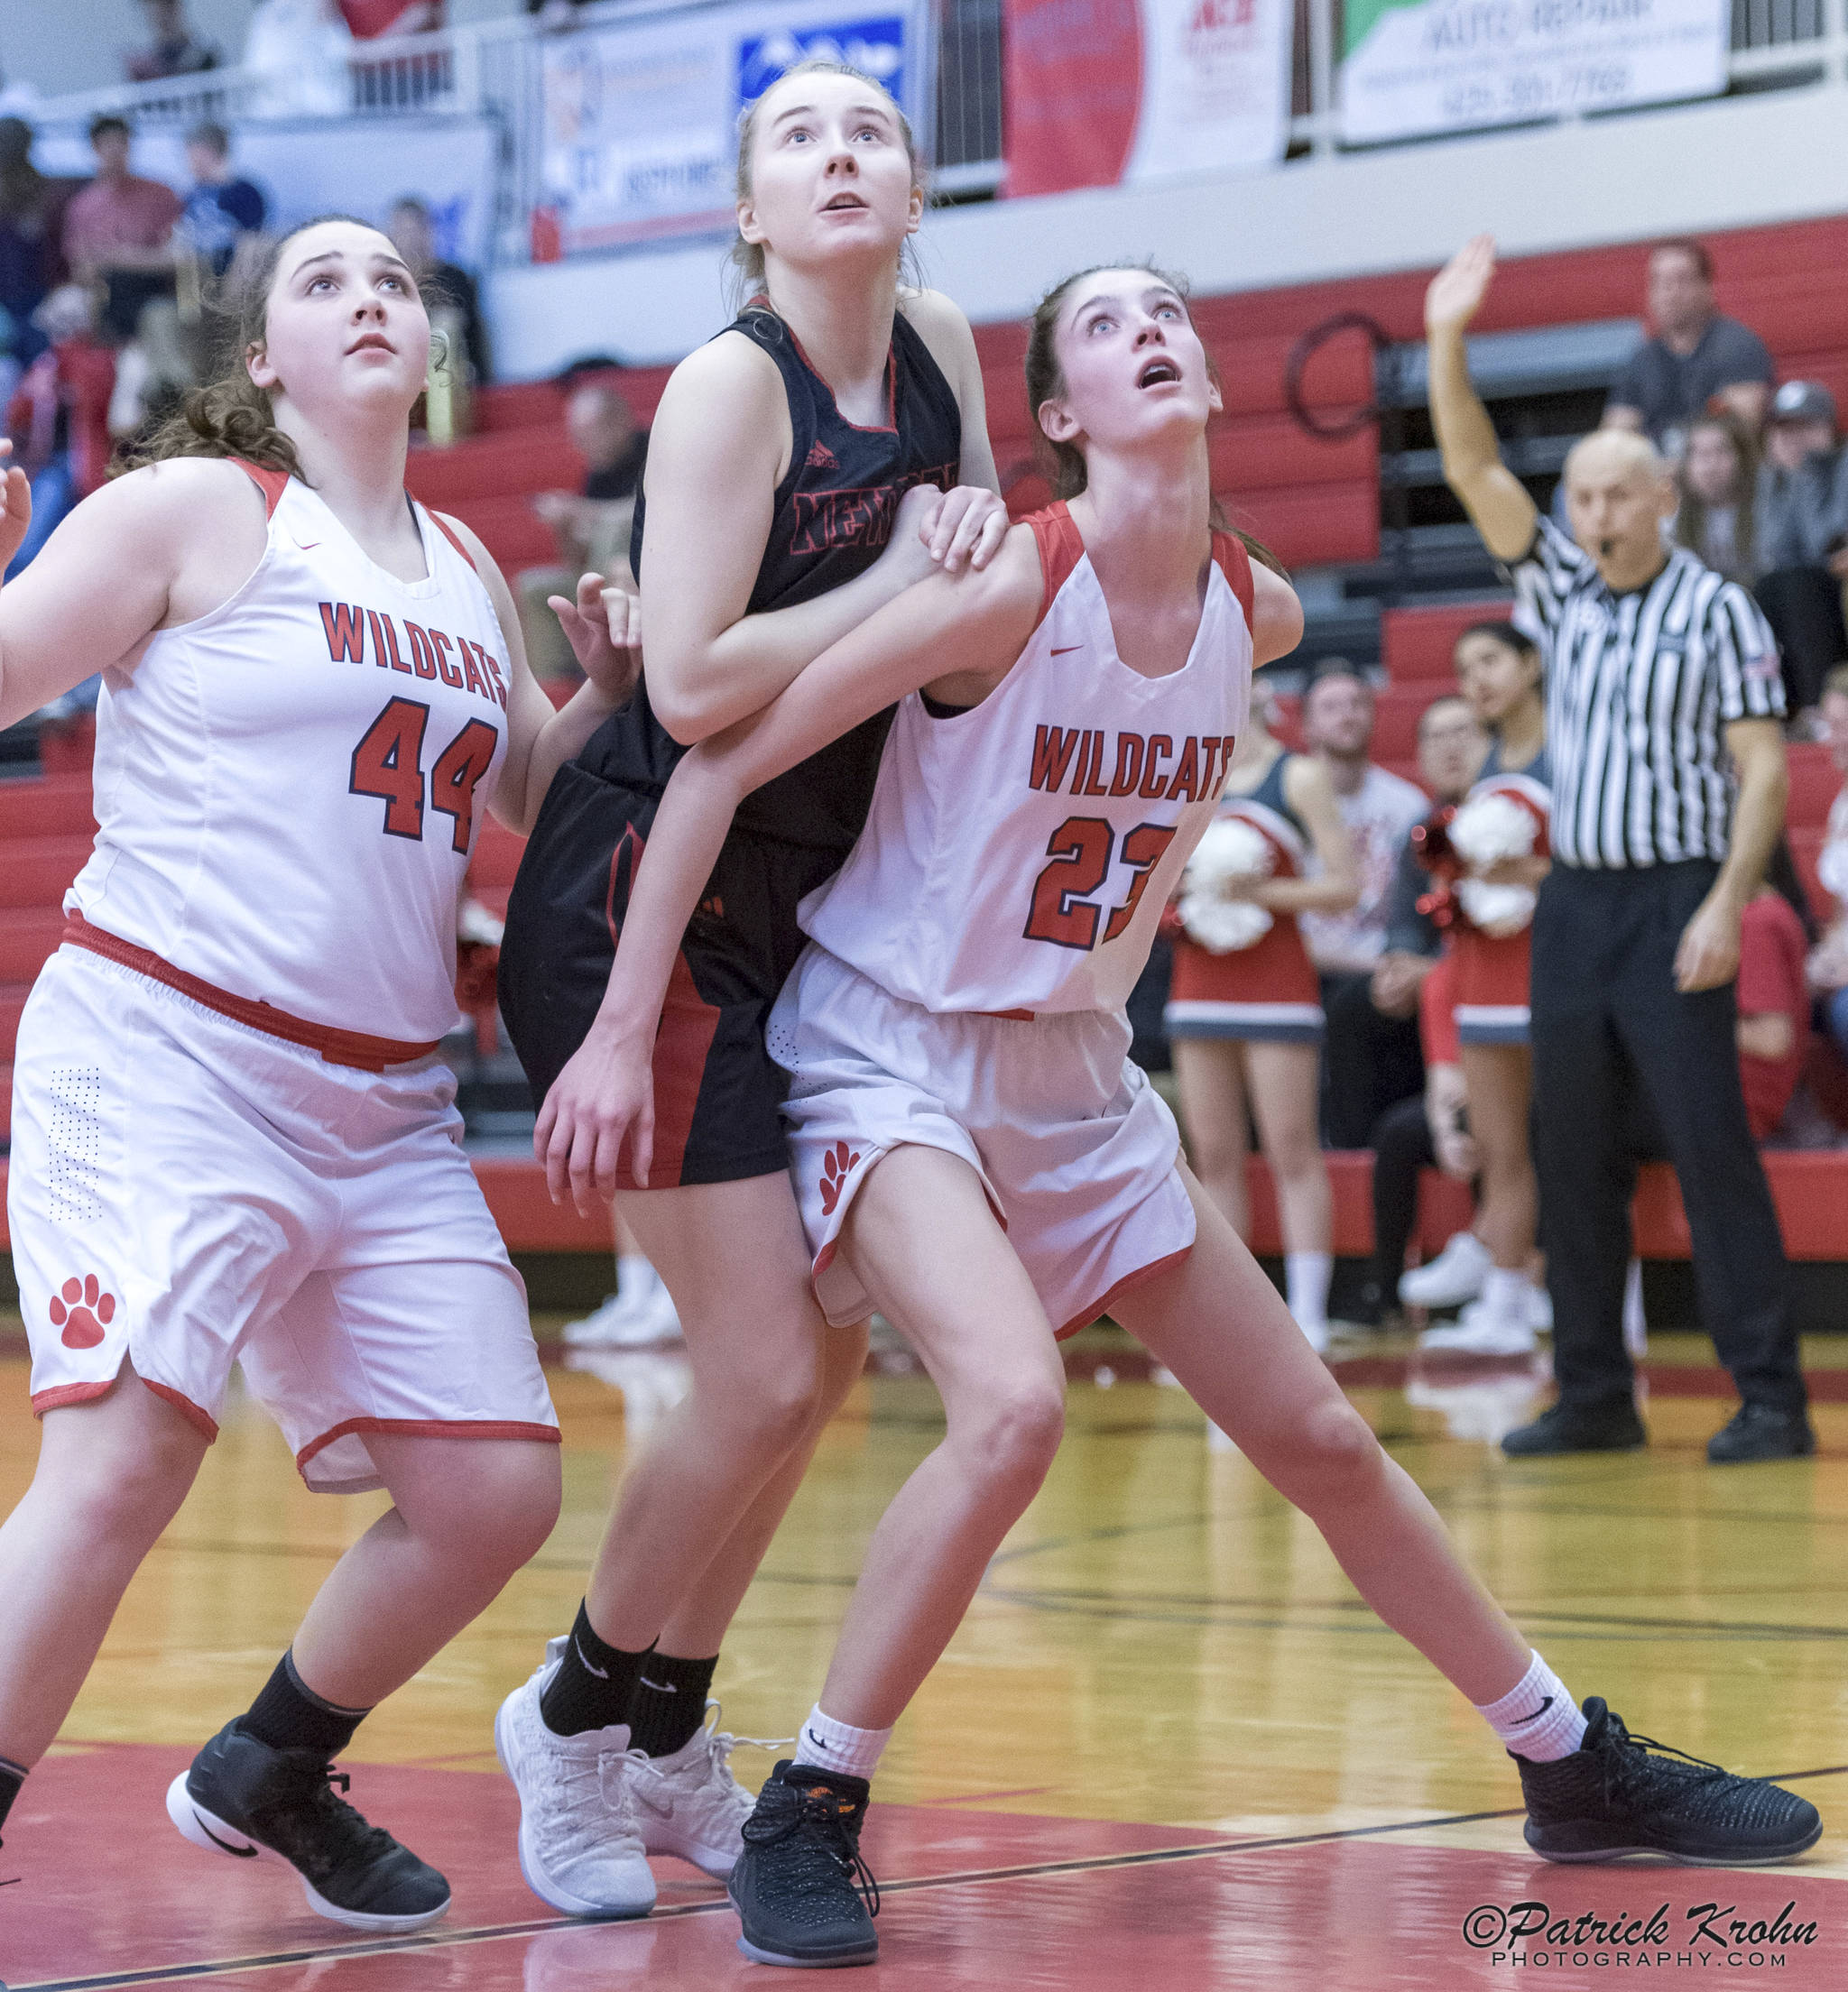 Mount Si Wildcats freshman Lauren Glazier, right, and senior Abigail Triou, left, box out a Newport player during a matchup on senior night on Jan. 16 in Snoqualmie. Photo courtesy of Patrick Krohn/Patrick Krohn Photography